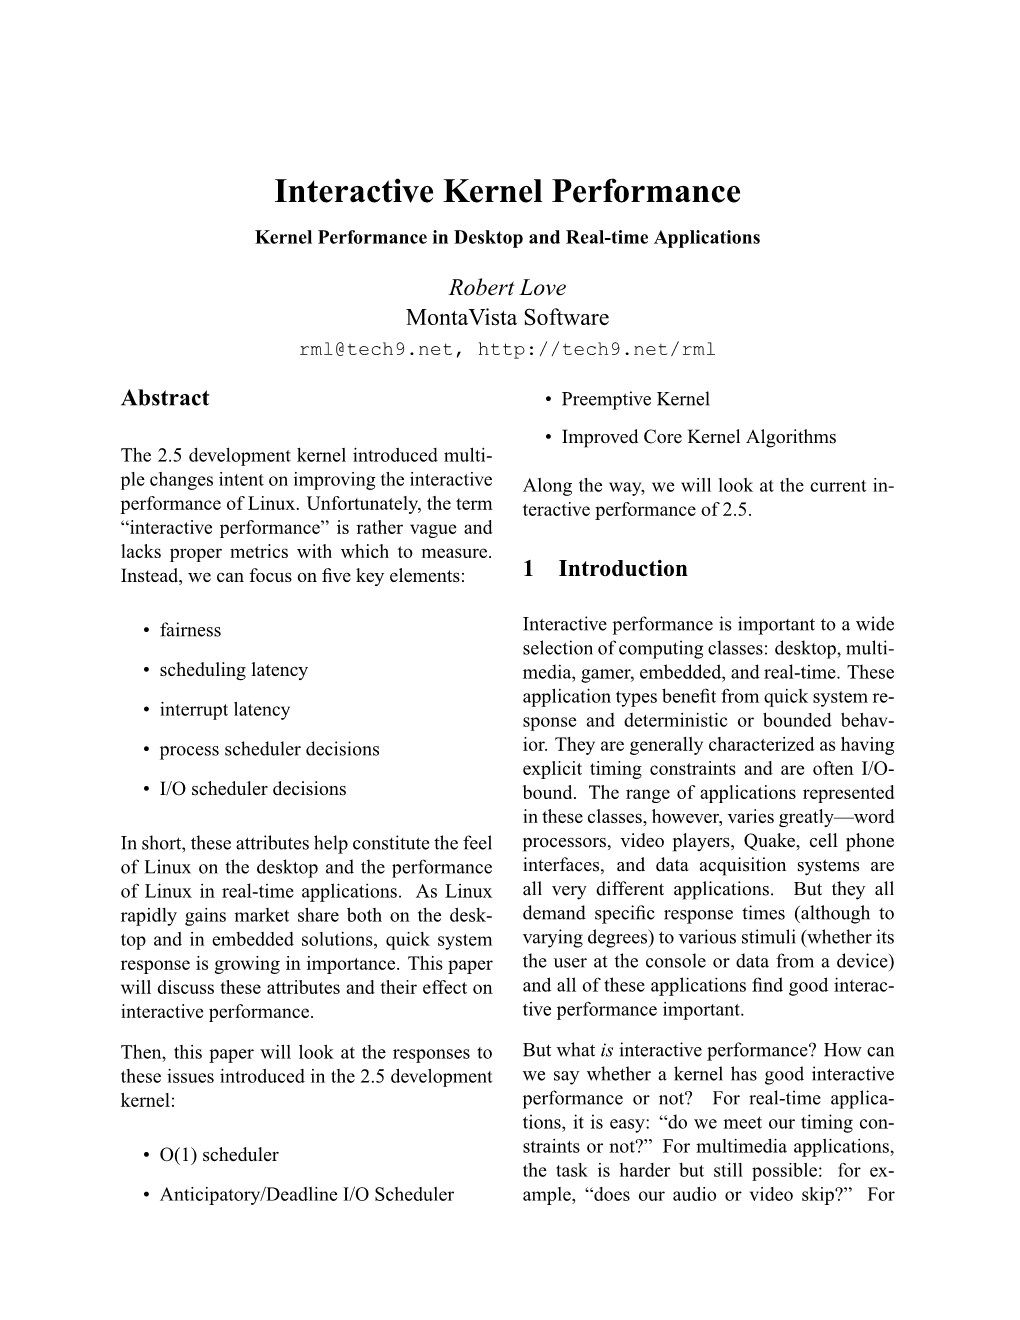 Interactive Kernel Performance Kernel Performance in Desktop and Real-Time Applications